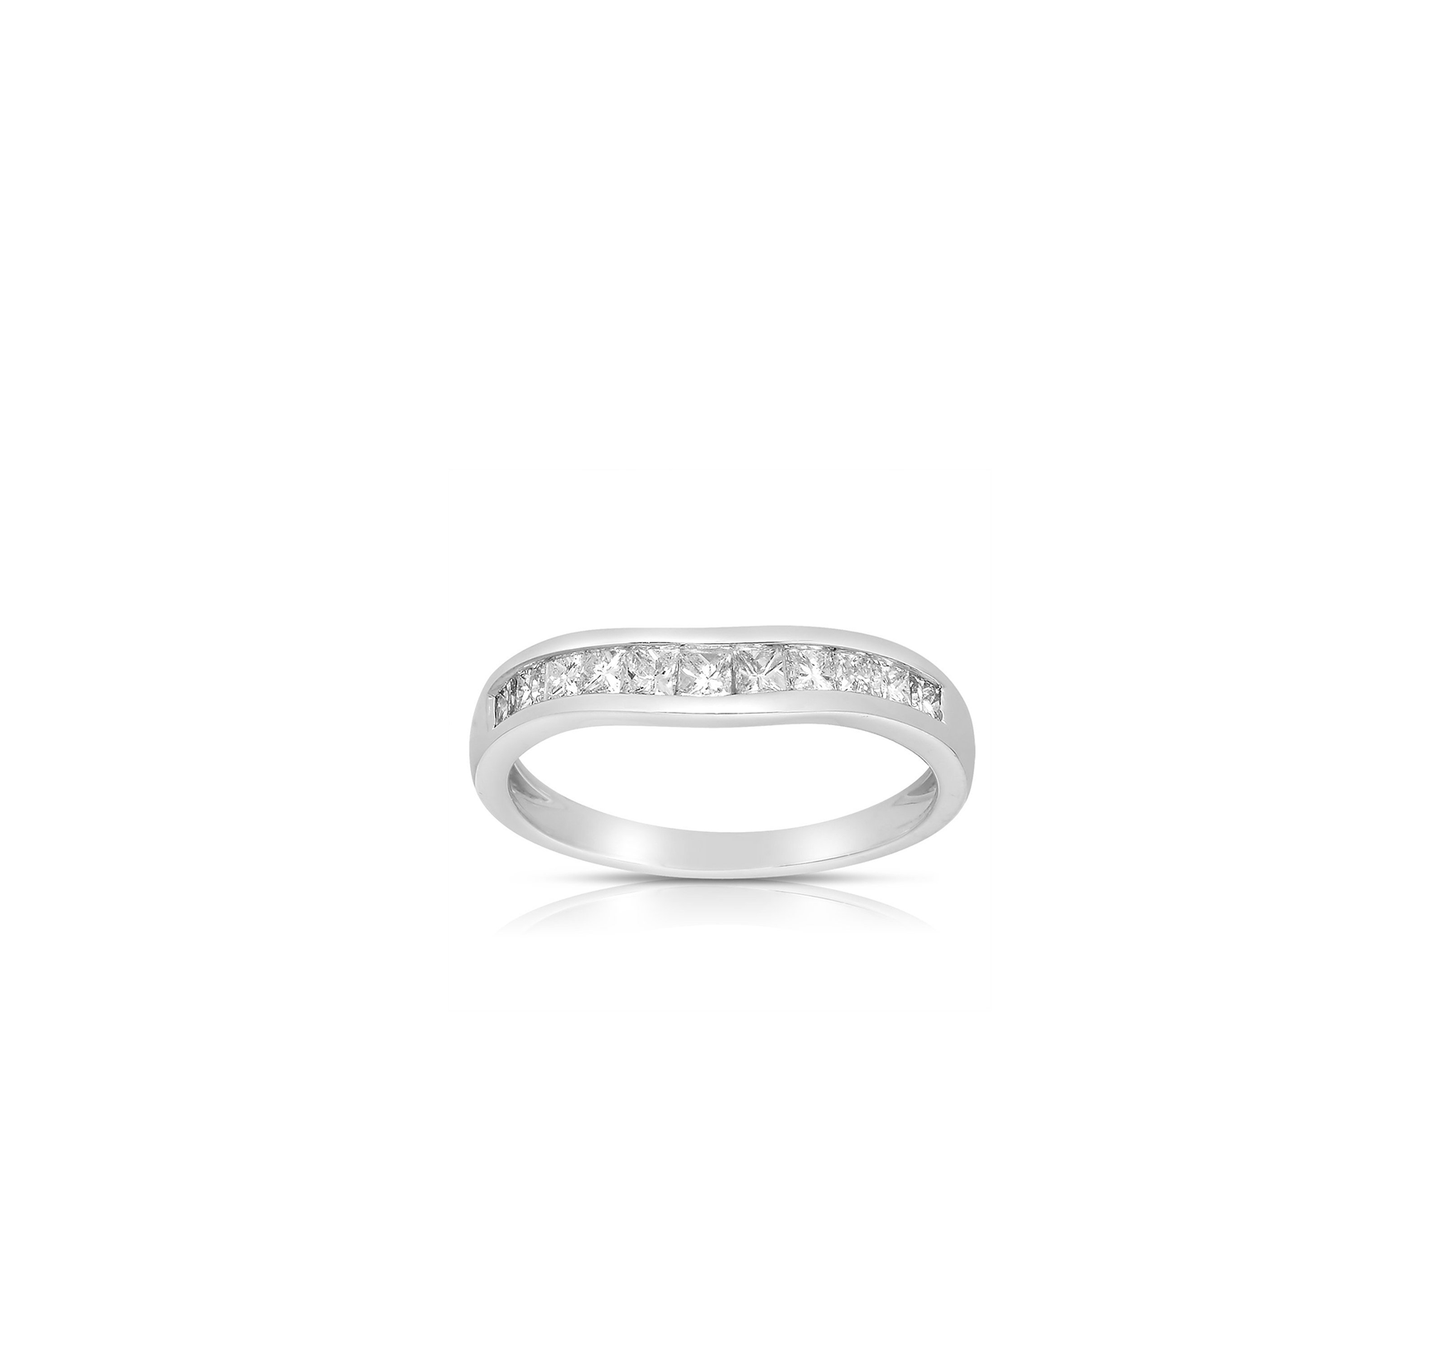 Sabel Collection 14K White Gold Princess Cut Diamond Curved Band